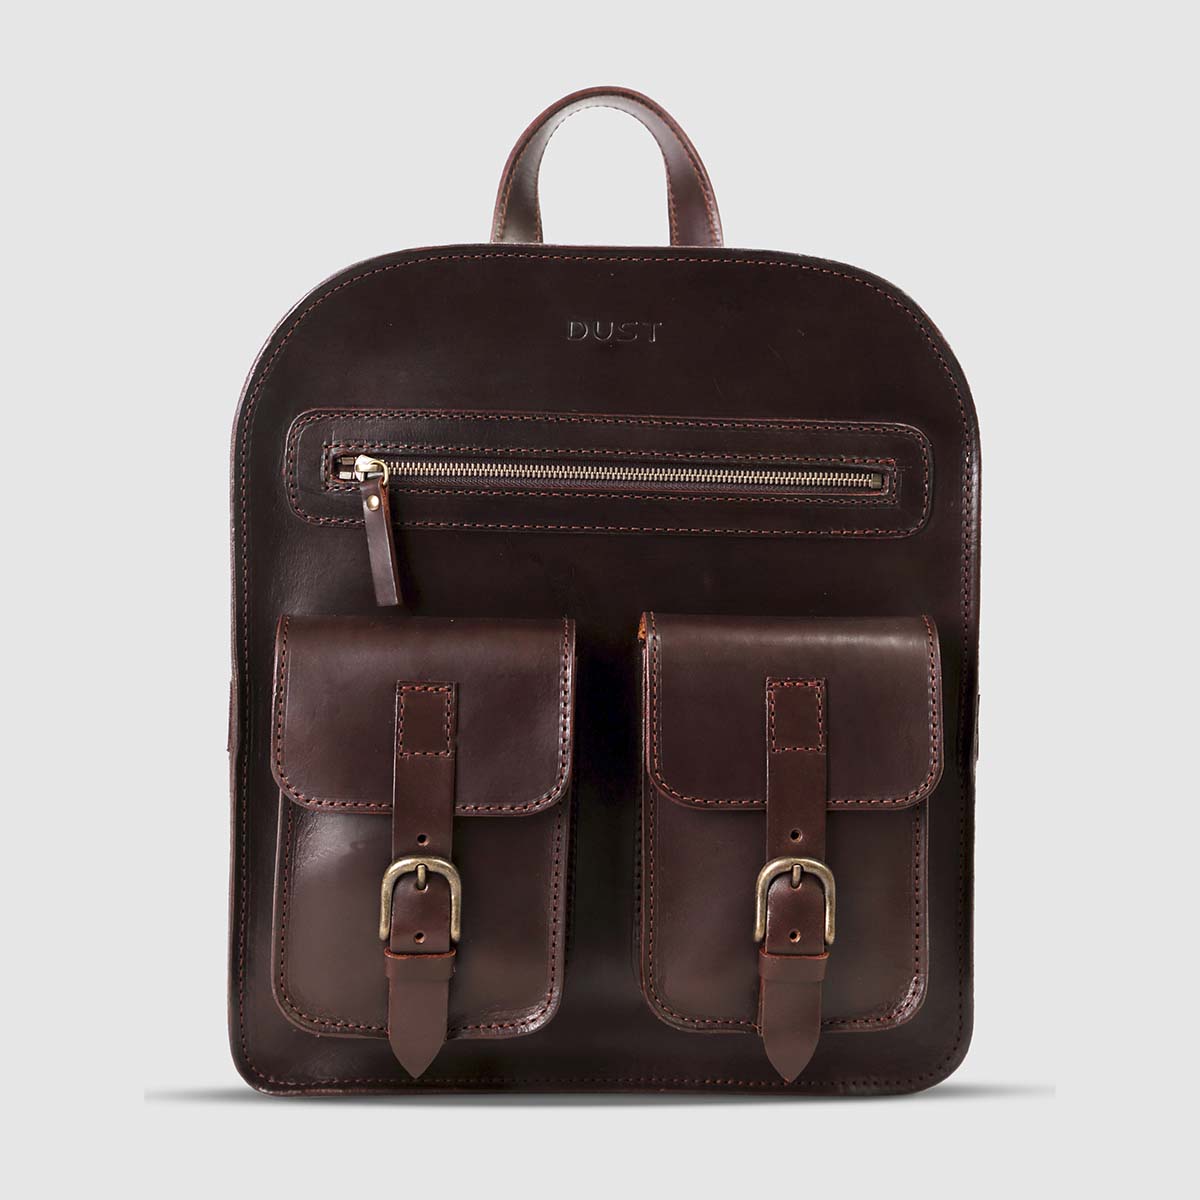 The Dust Company Camp Leather Backpack